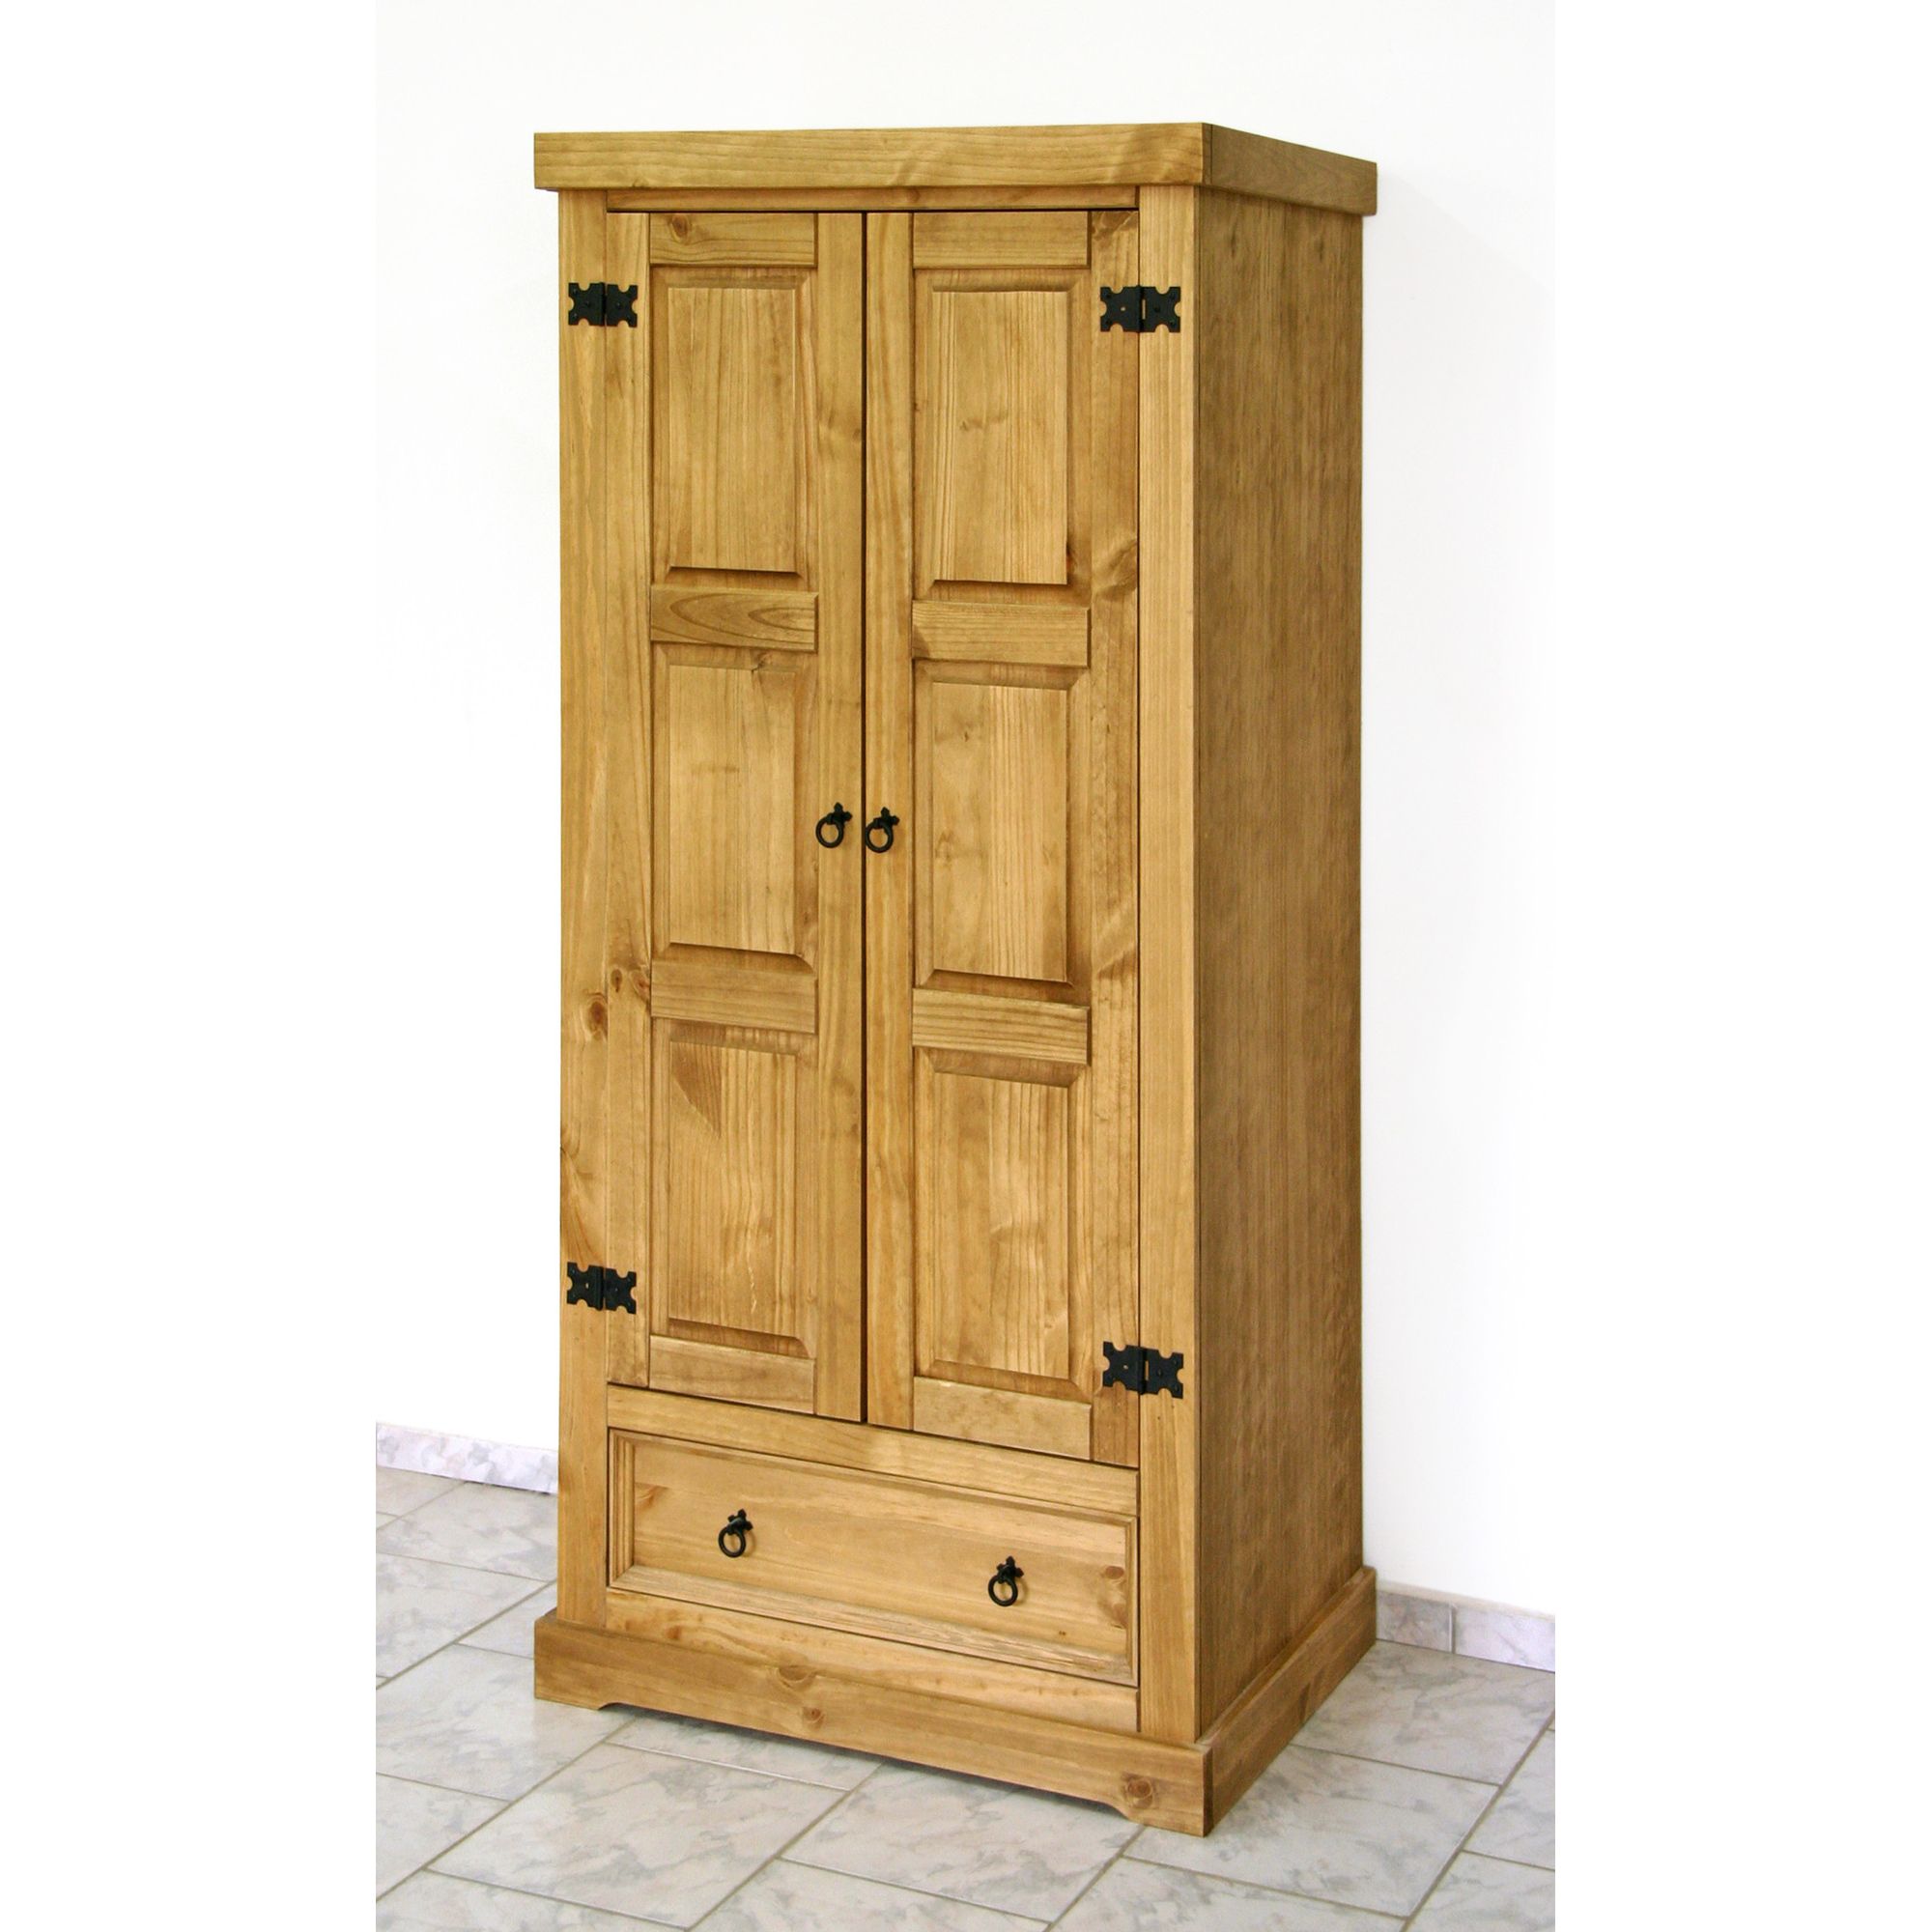 Home Essence Windmill 1 Drawer Wardrobe in Solid Pine at Tesco Direct